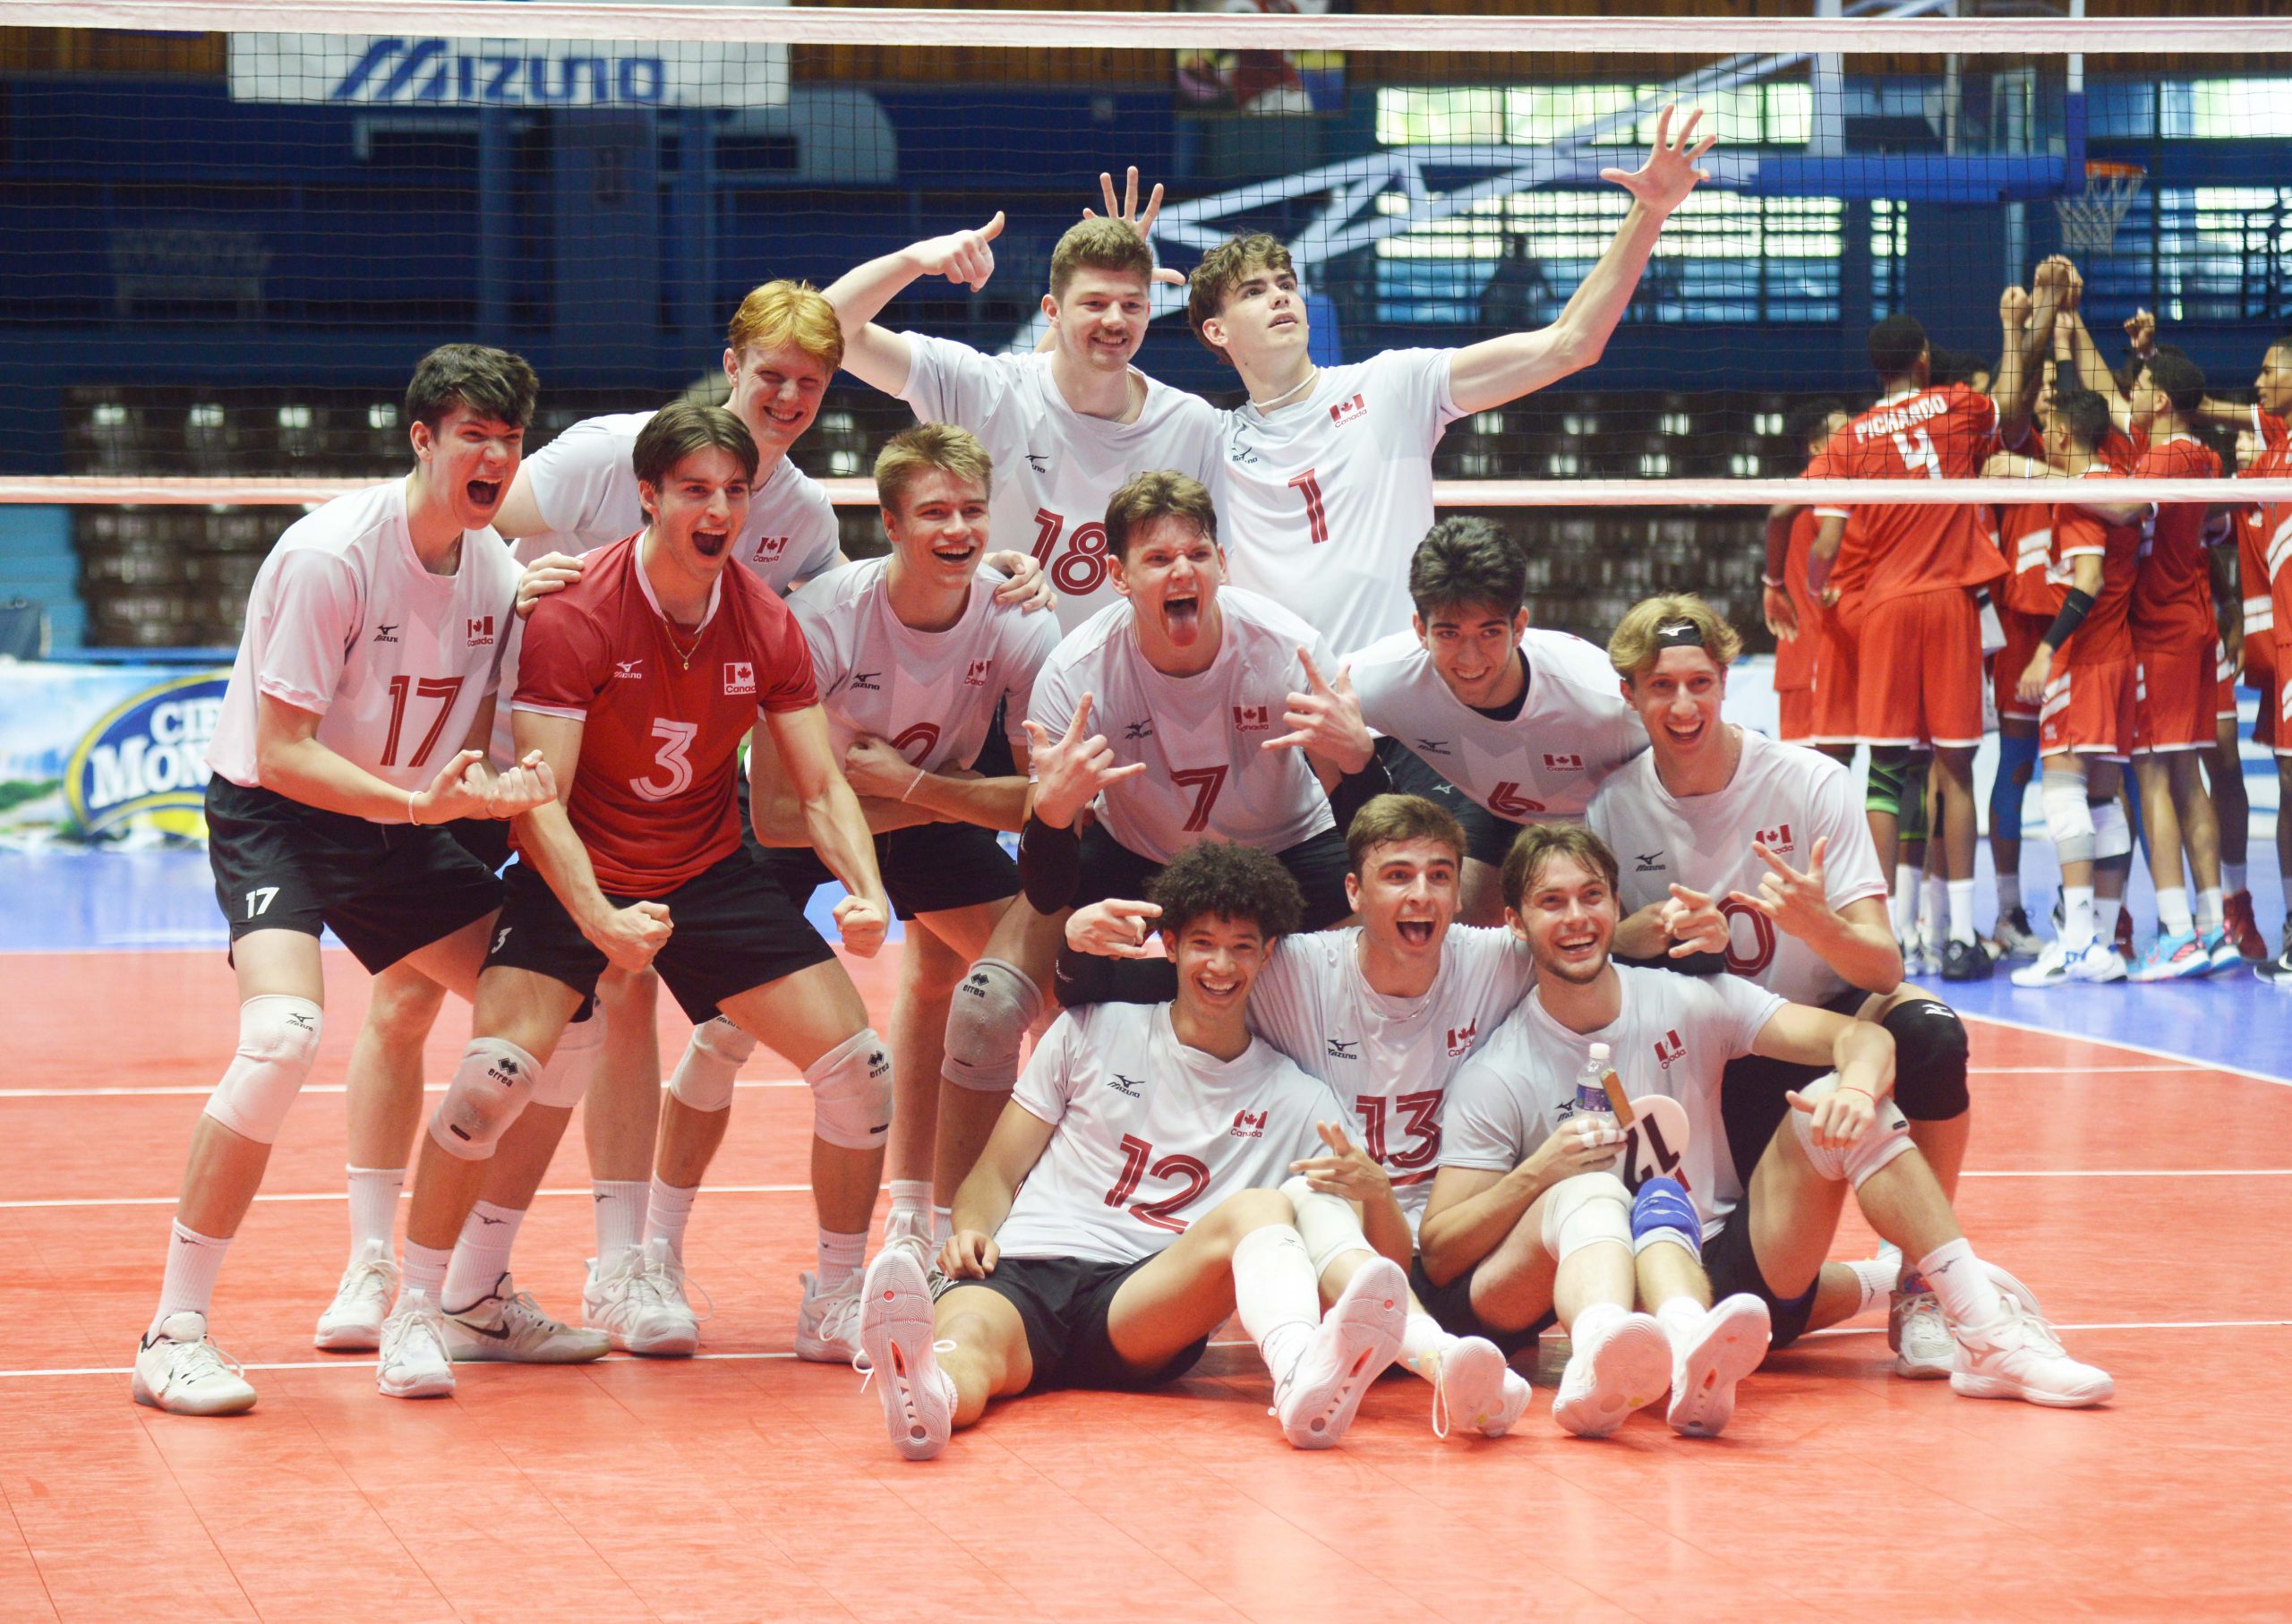 Canada reaches the U21 Pan American Cup semifinals undefeated